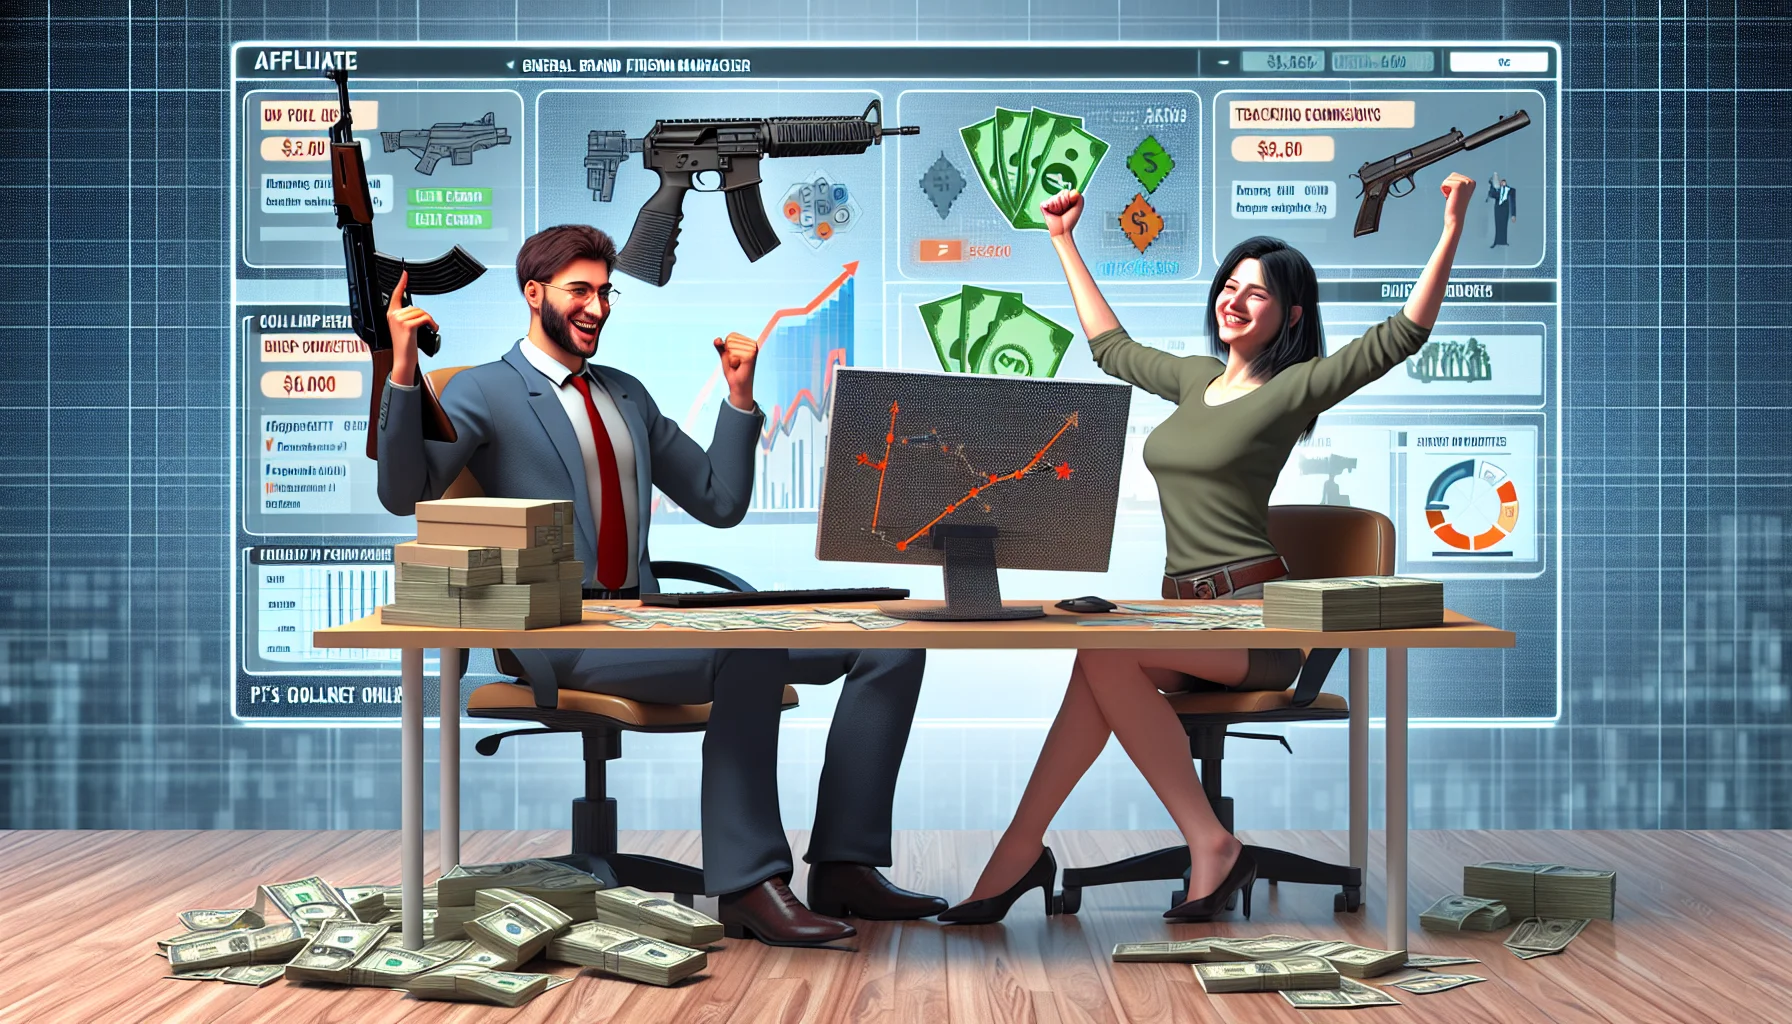 Render a humorous, realistic image that illustrates a hypothetical affiliate program for a general-brand firearm manufacturer. Depict this in an enthralling setting related to earning money online. Show a Caucasian male and a South Asian female, both engaged in successful online activities, perhaps tracking commissions on a virtual dashboard, chatting with customers in a live chat, or celebrating a big sale. Ensure the environment is filled with nods to the digital world, such as computers with charts or graphs, pixelated symbols of money, and infographics. Make sure to keep the tone light-hearted and the mood encouraging.